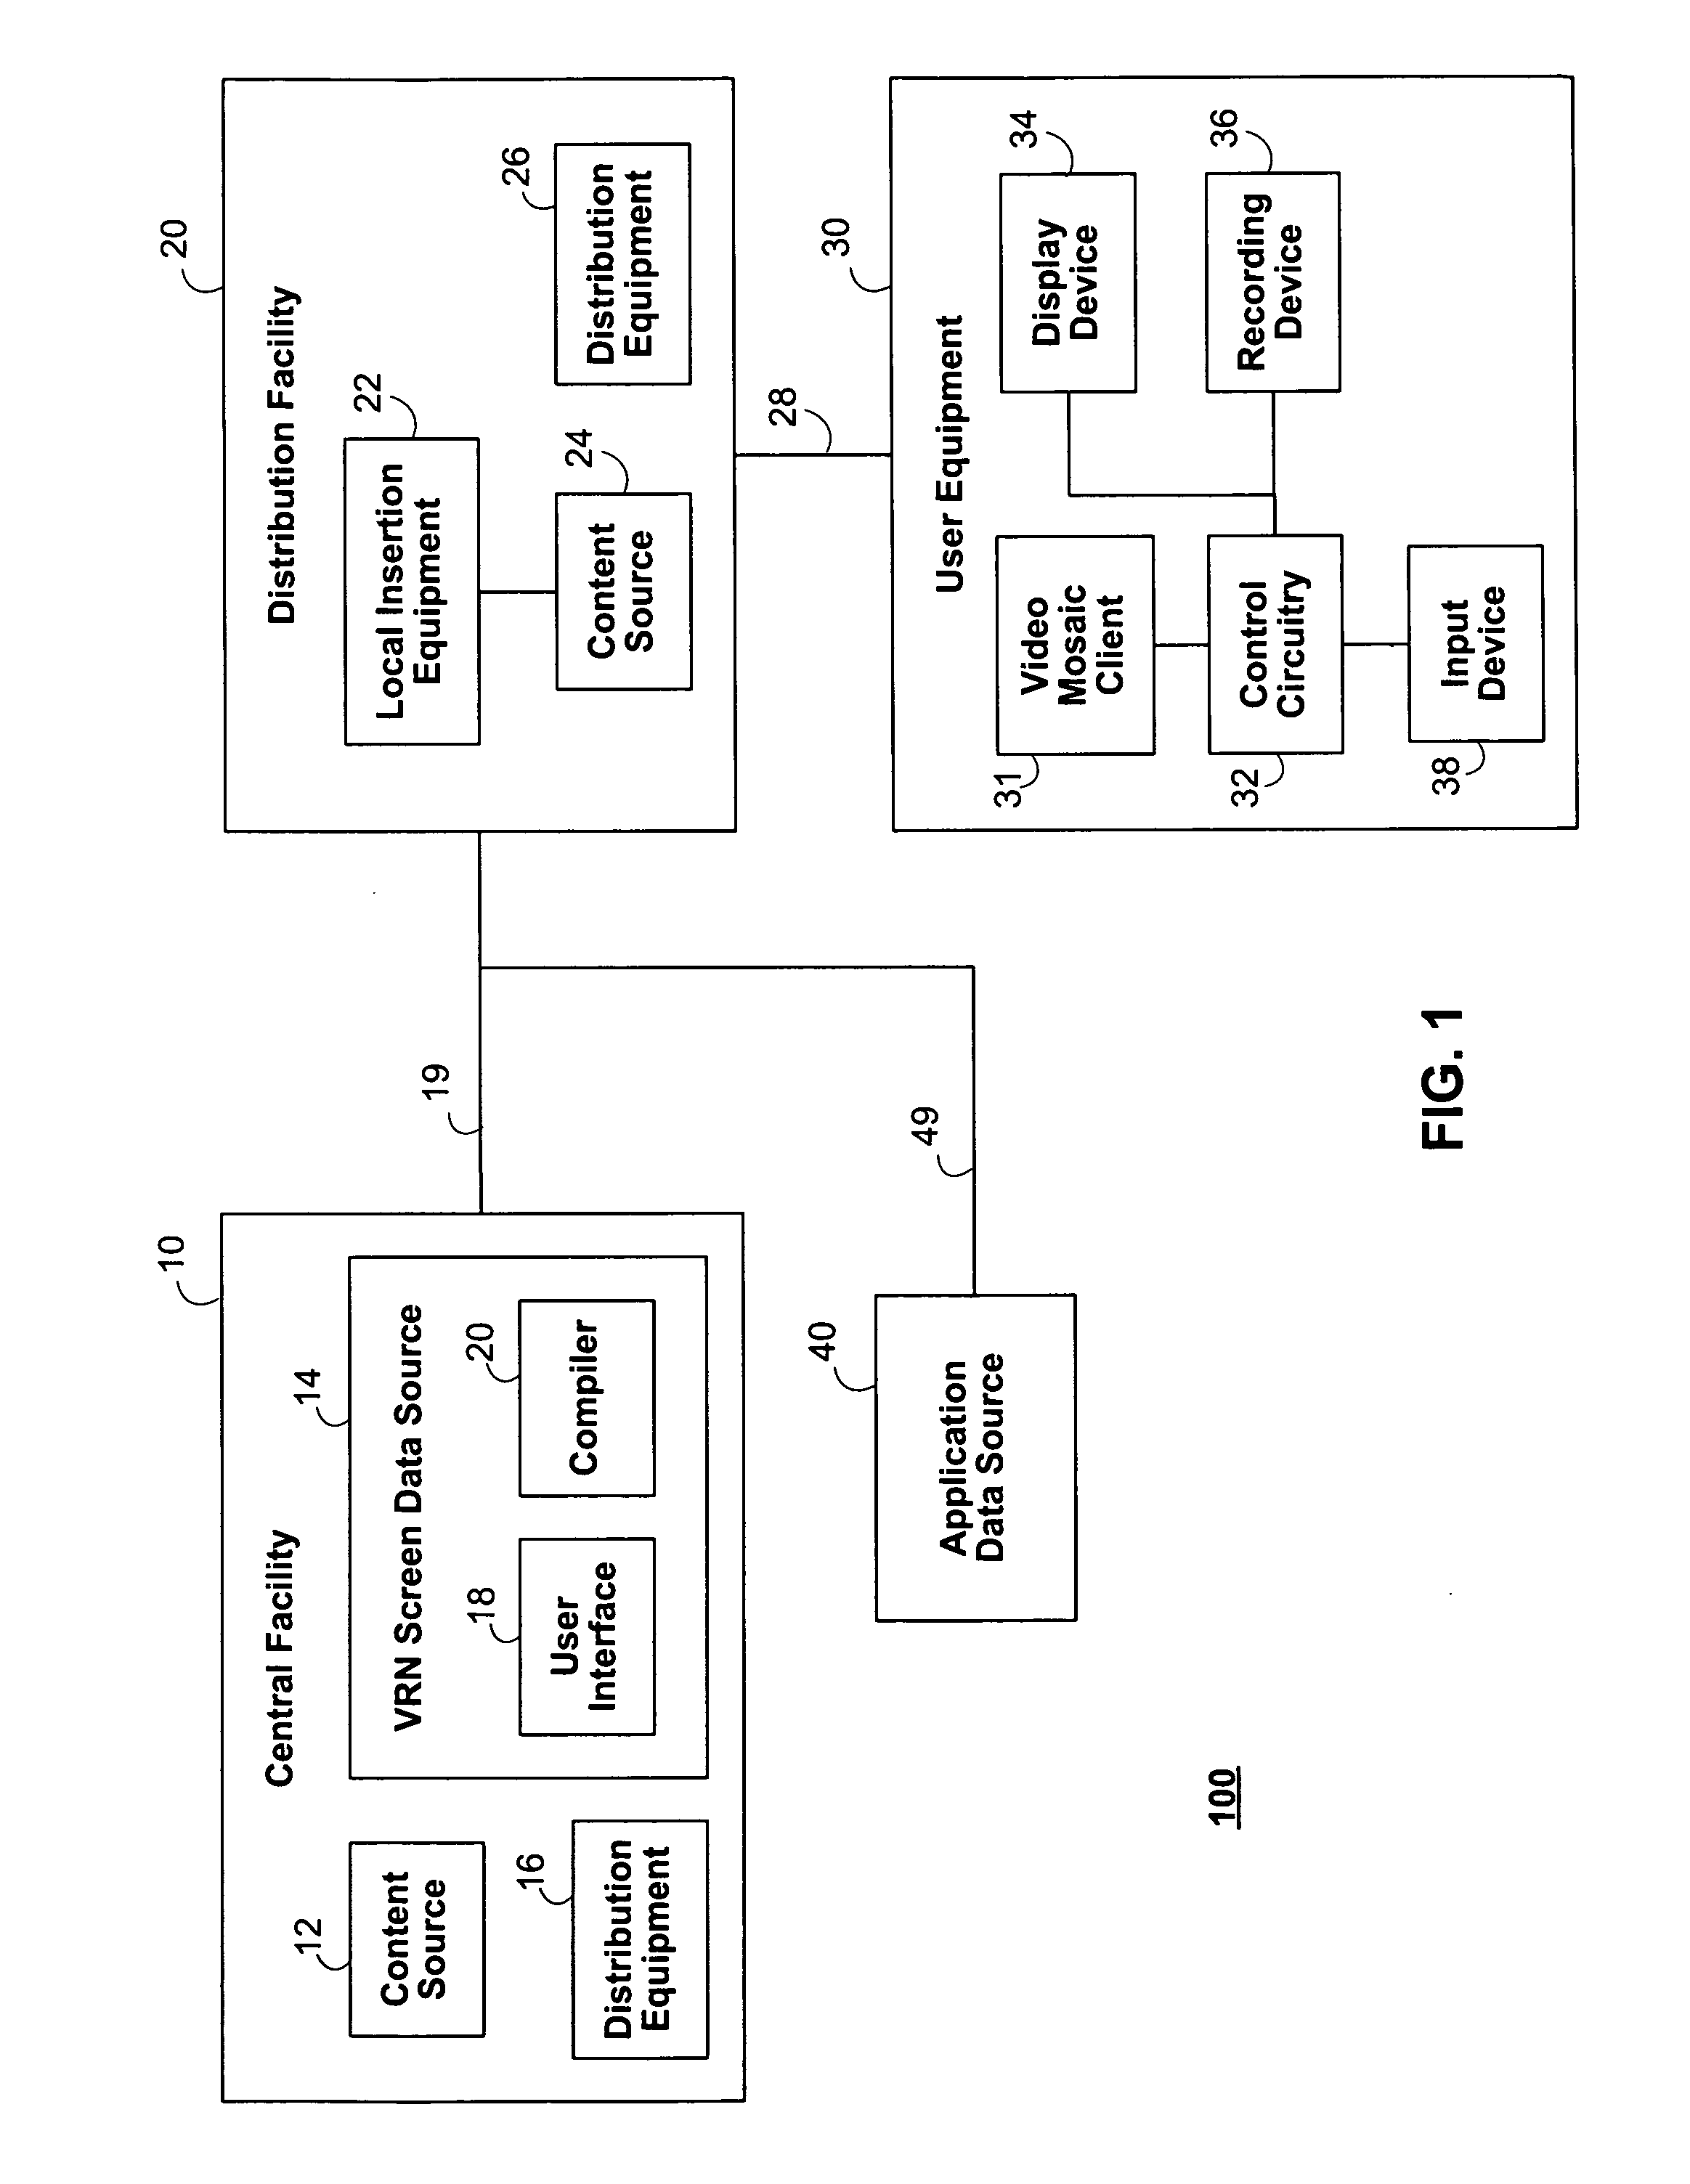 Systems and methods for providing blackout support in video mosaic environments